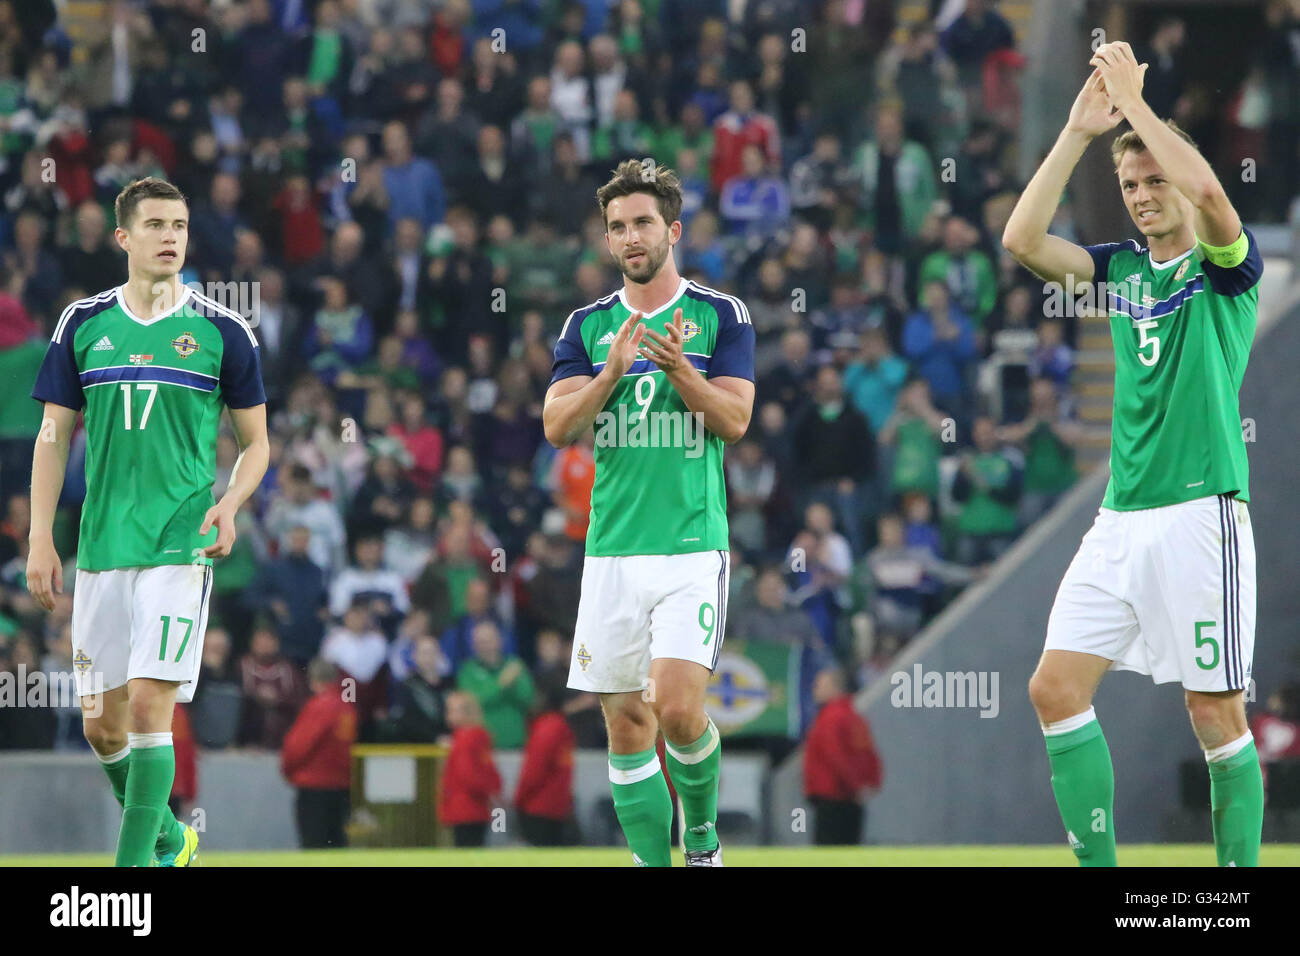 27th May 2016 - Vauxhall International Challenge (Friendly). Northern Ireland 3 Belarus 0. Northern Ireland players Paddy McNair (17), Will Grigg (9) and Jonny Evans (5) celebrate the win before the Euros. Stock Photo